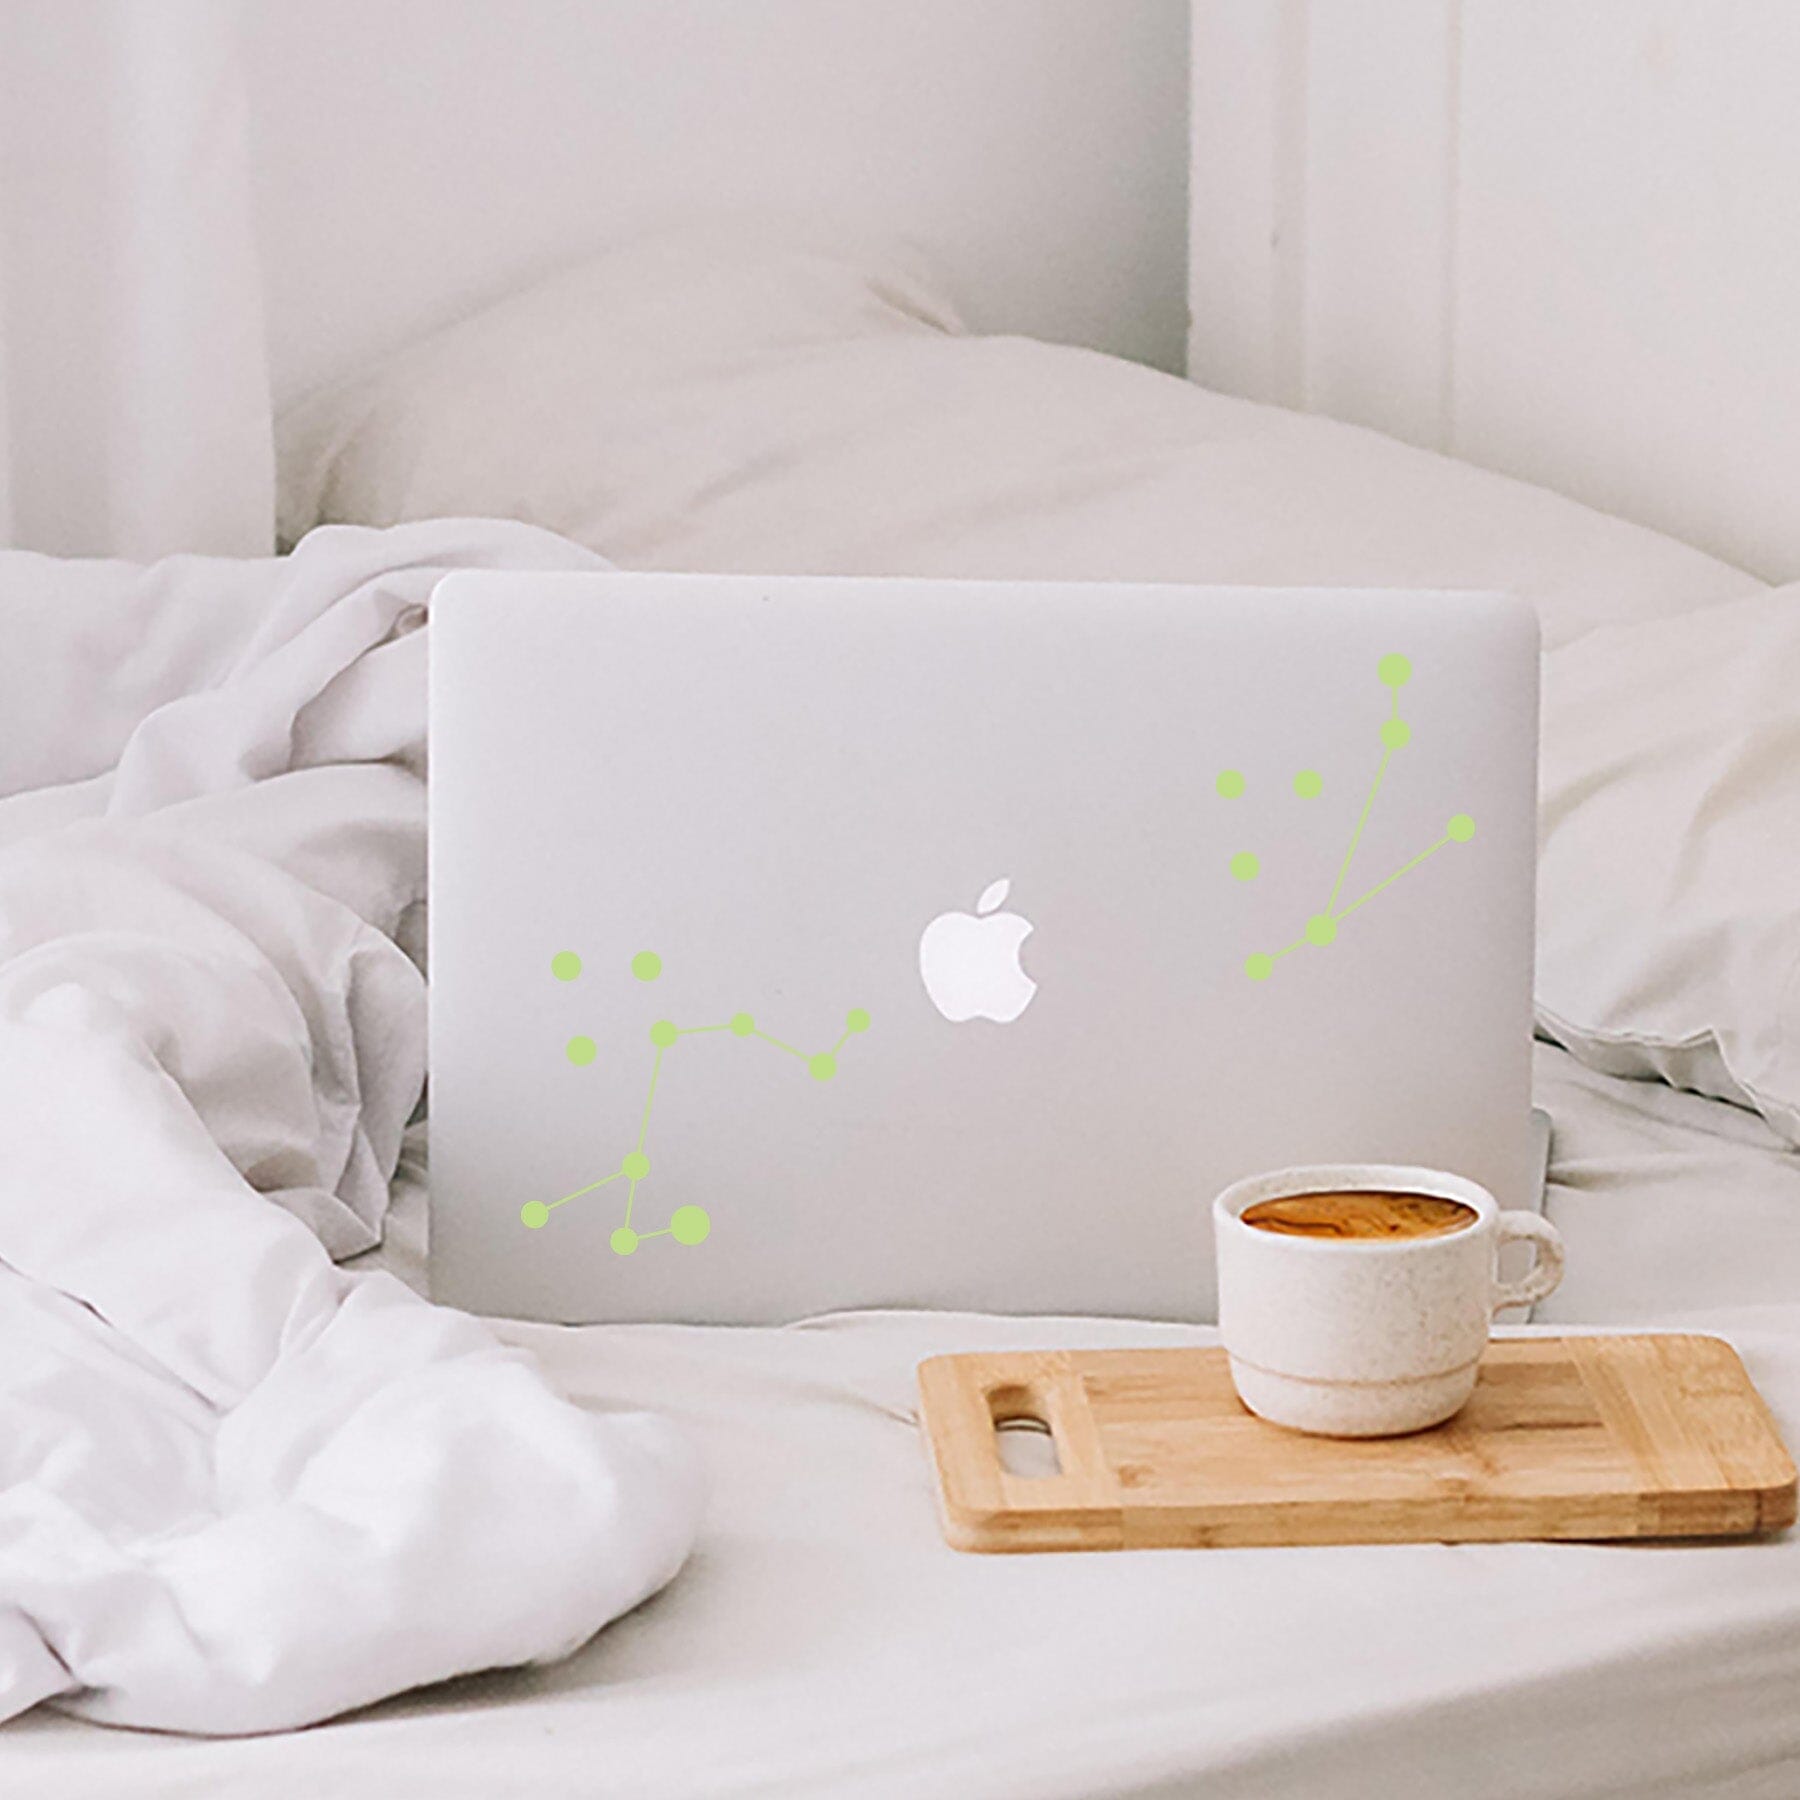 Constellation Wall Decals Decals Urbanwalls Sample Key Lime 